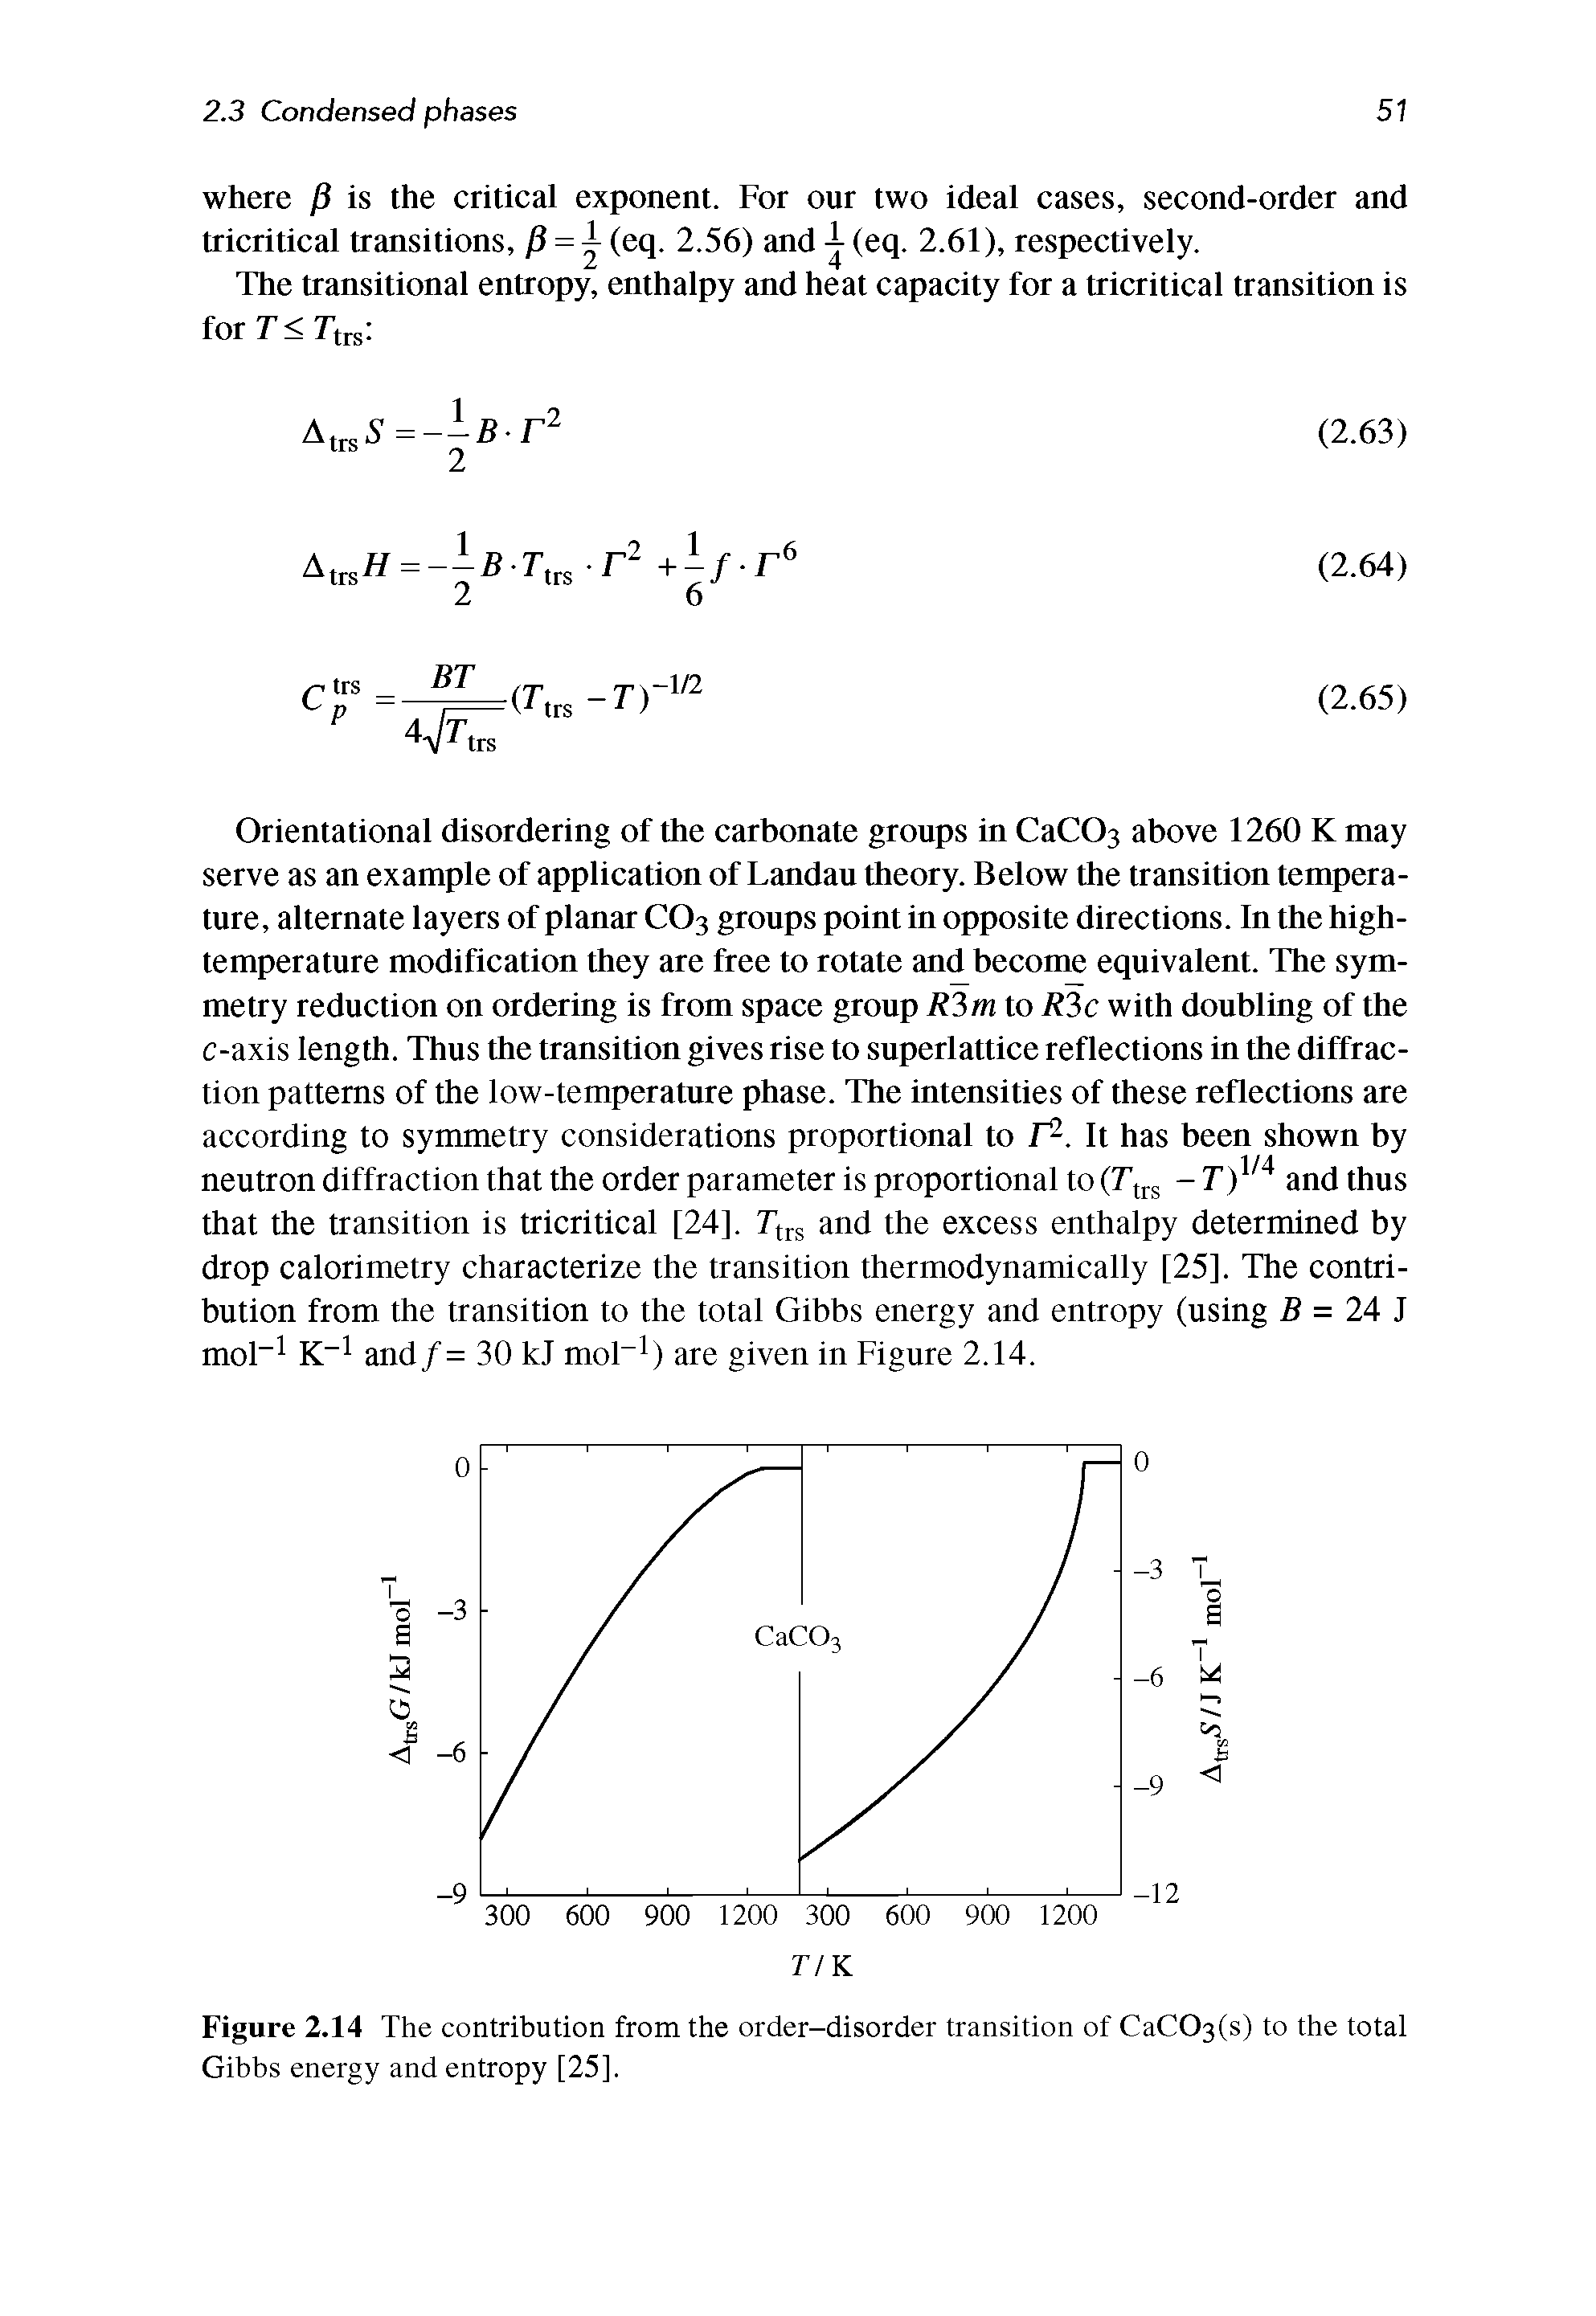 Figure 2.14 The contribution from the order-disorder transition of CaCC>3(s) to the total Gibbs energy and entropy [25],...